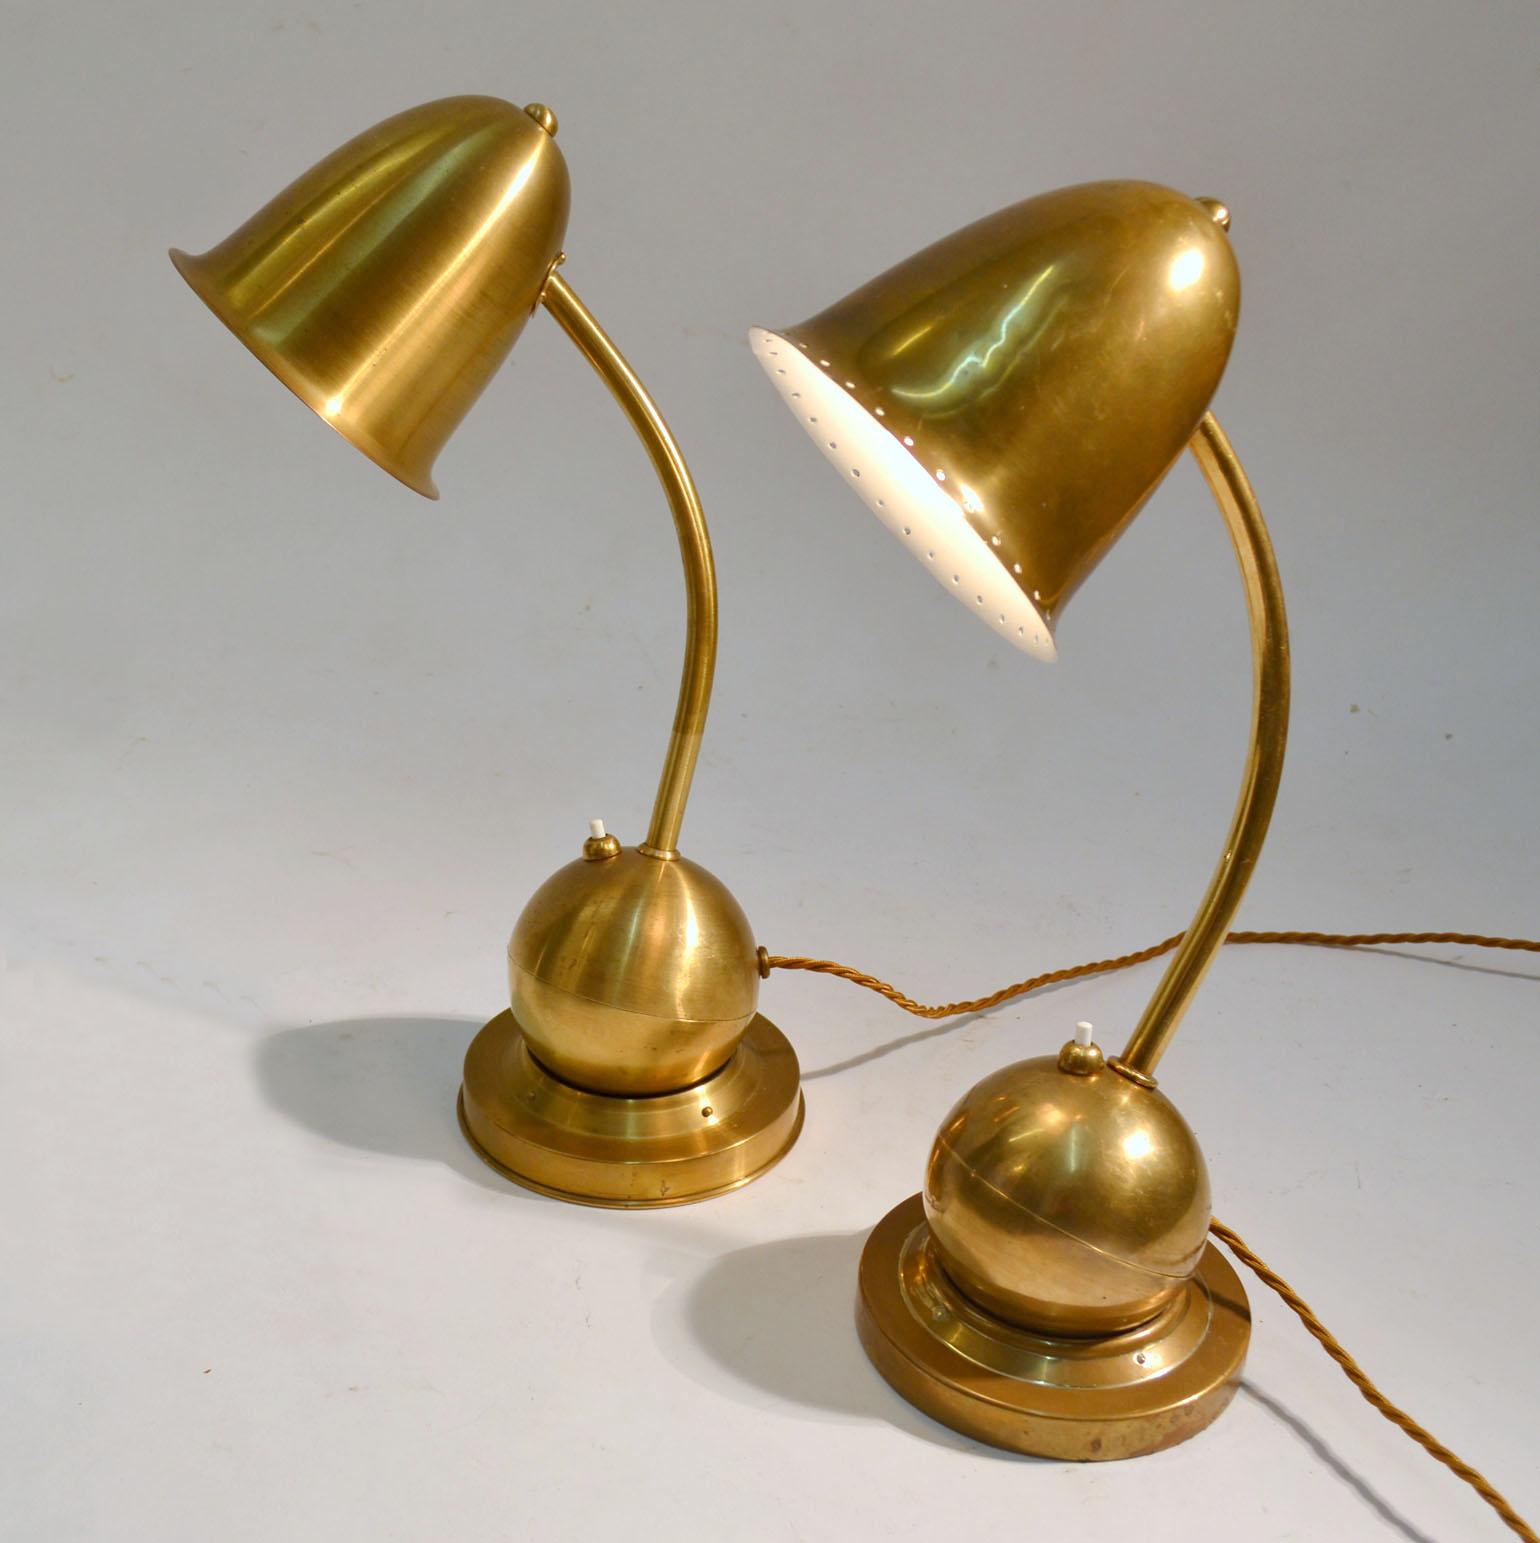 Modernist brass counterbalance table or desk lamps by Daalderop, Giso Holland, 1930s. One is decorated in a ring of perforations around the shade which are rare with these lamps. The lamps are fully adjustable in any position working with gravity